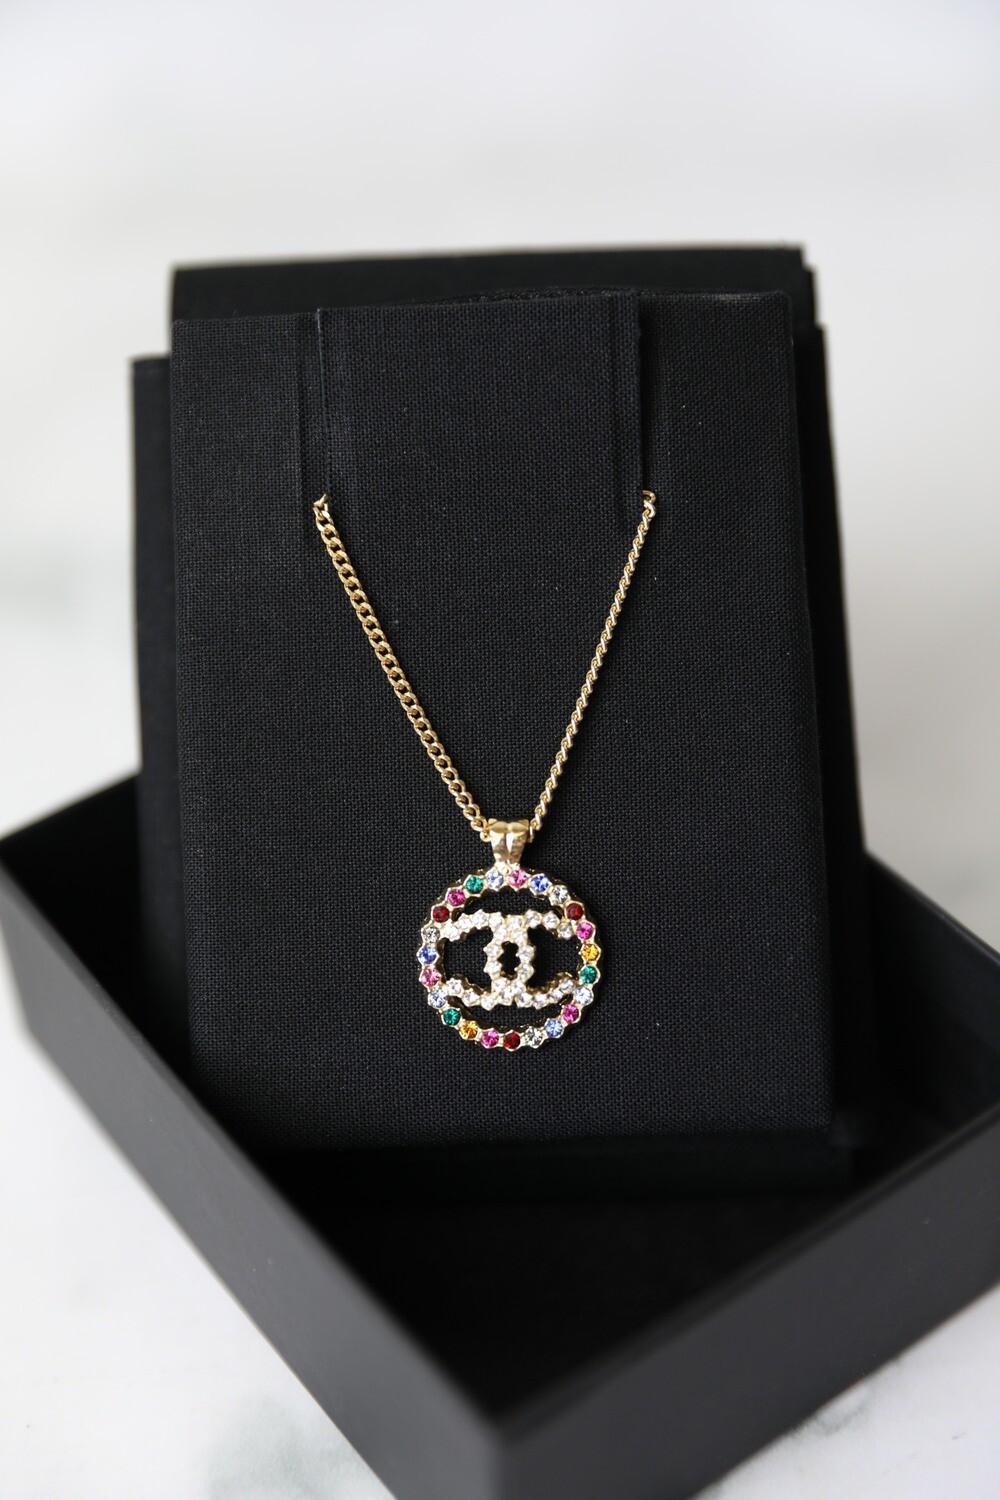 Chanel CC Round Pendant Necklace, Rainbow Crystal, New in Box WA001